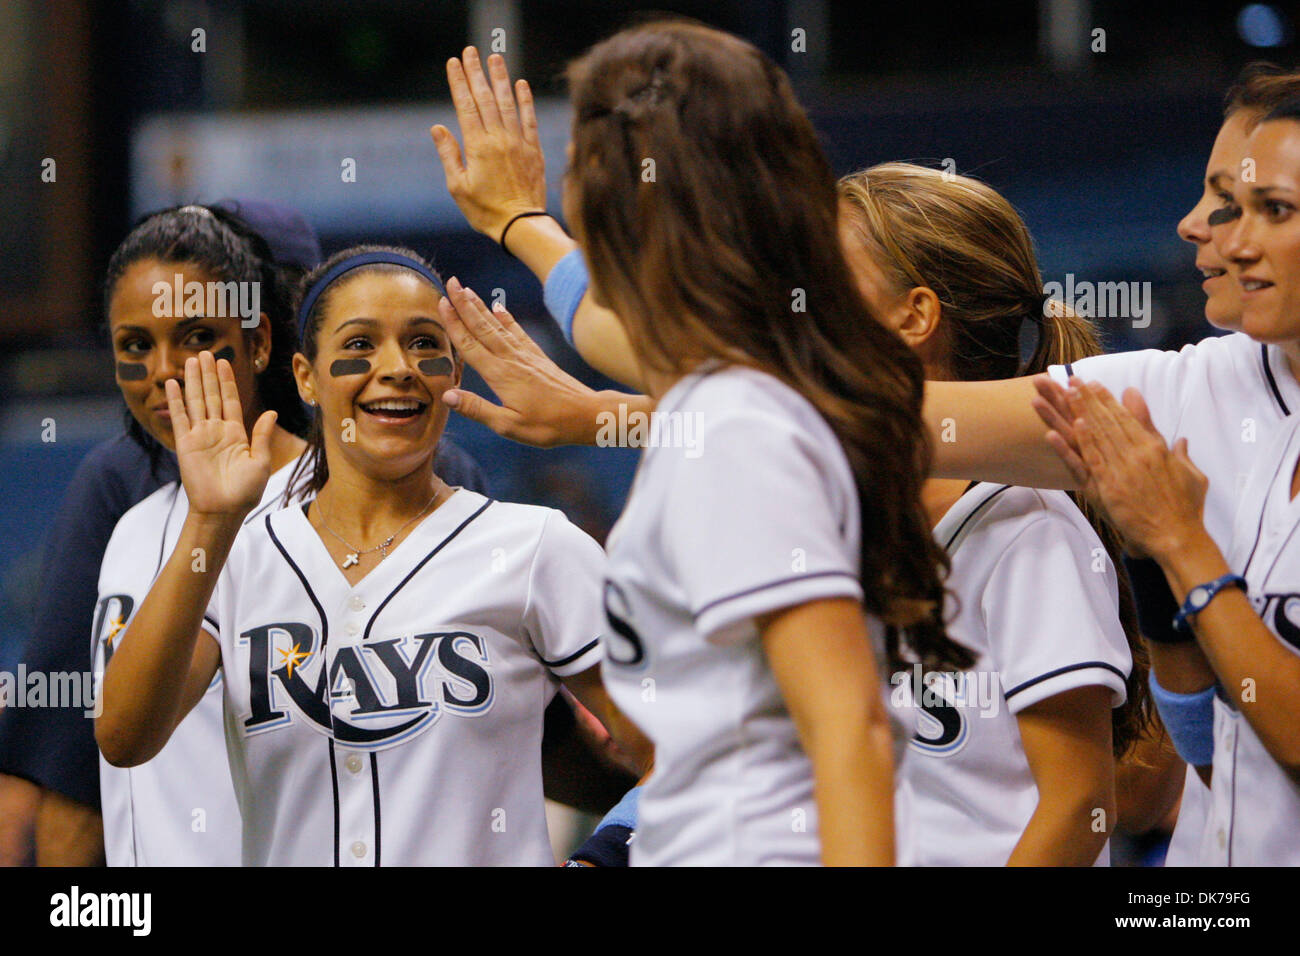 June 18, 2011 - St. Petersburg, FL, USA - SP 335922 FOUN RAYS 2.EDMUND D. FOUNTAIN | Times .(06/18/2011 St. Petersburg) Giselle Rodriguez, left, wife of Tampa Bay Rays infielder Sean Rodriguez, high-fives her teammates after scoring a run in the innaugural Rays/Marlins wives softball game on June 18, 2011. The Tampa Bay Rays played the Florida Marlins on June 18, 2011 at Tropicana  Stock Photo